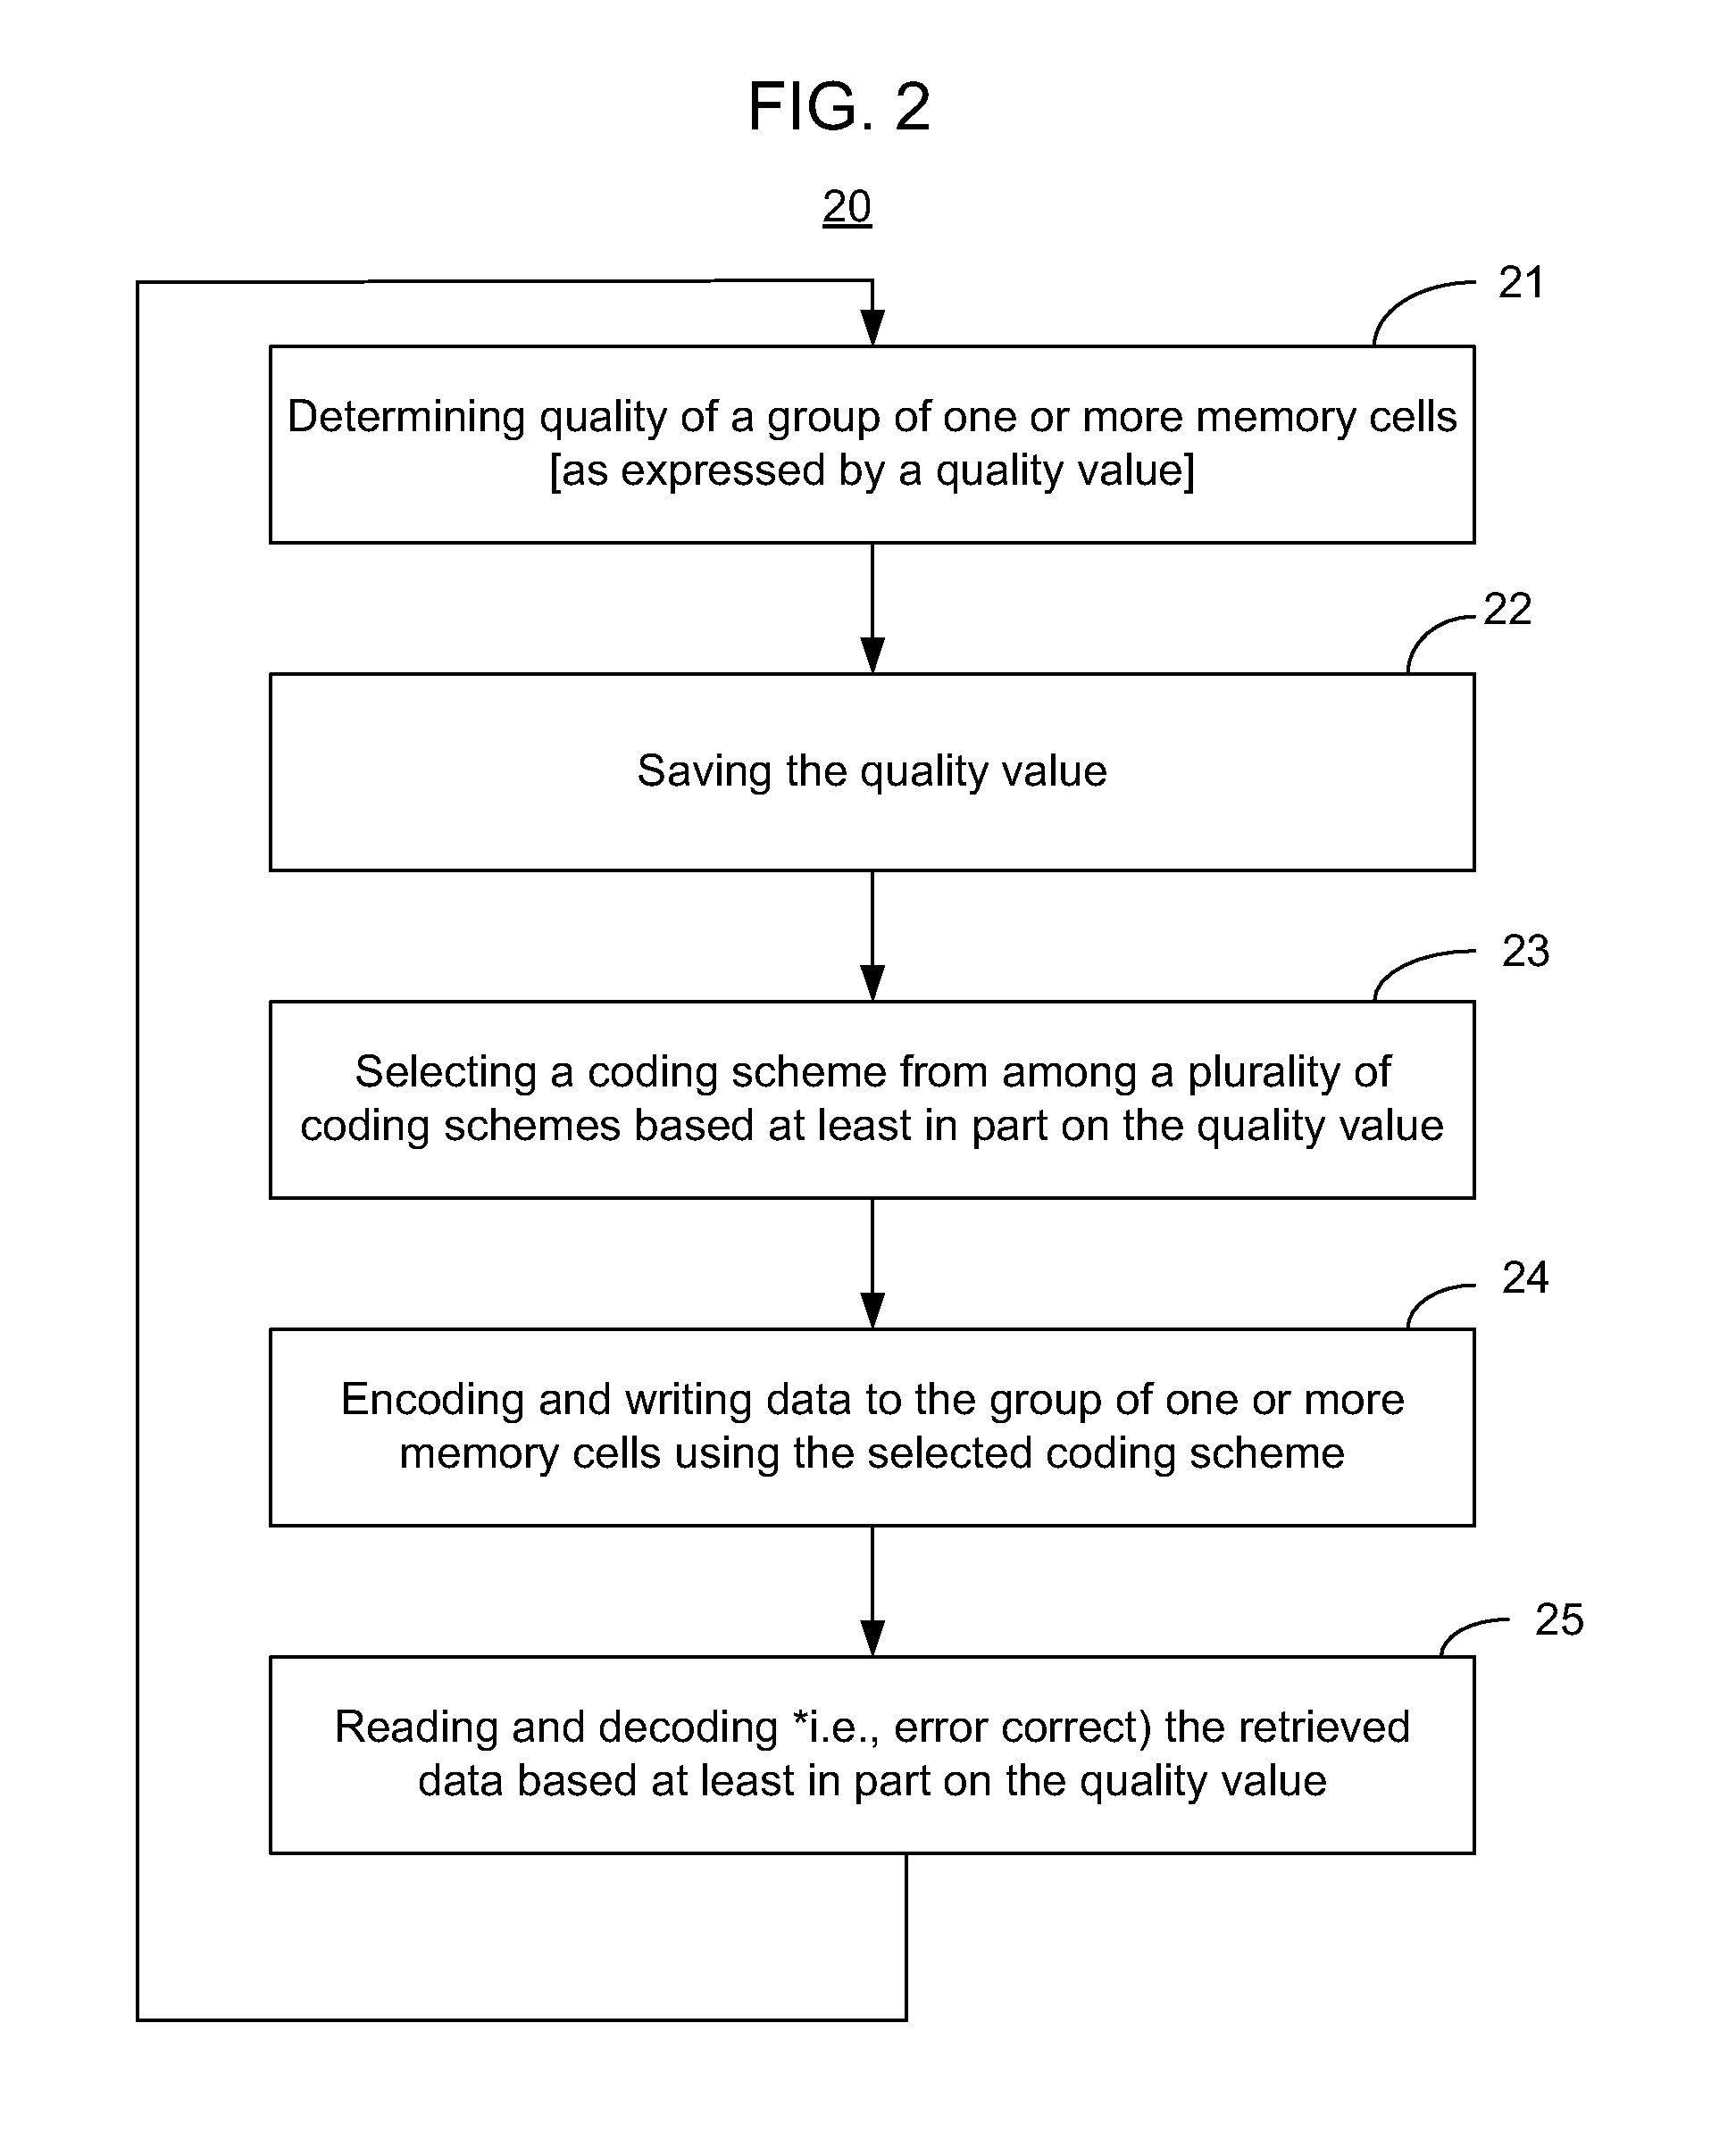 Adaptive systems and methods for storing and retrieving data to and from memory cells